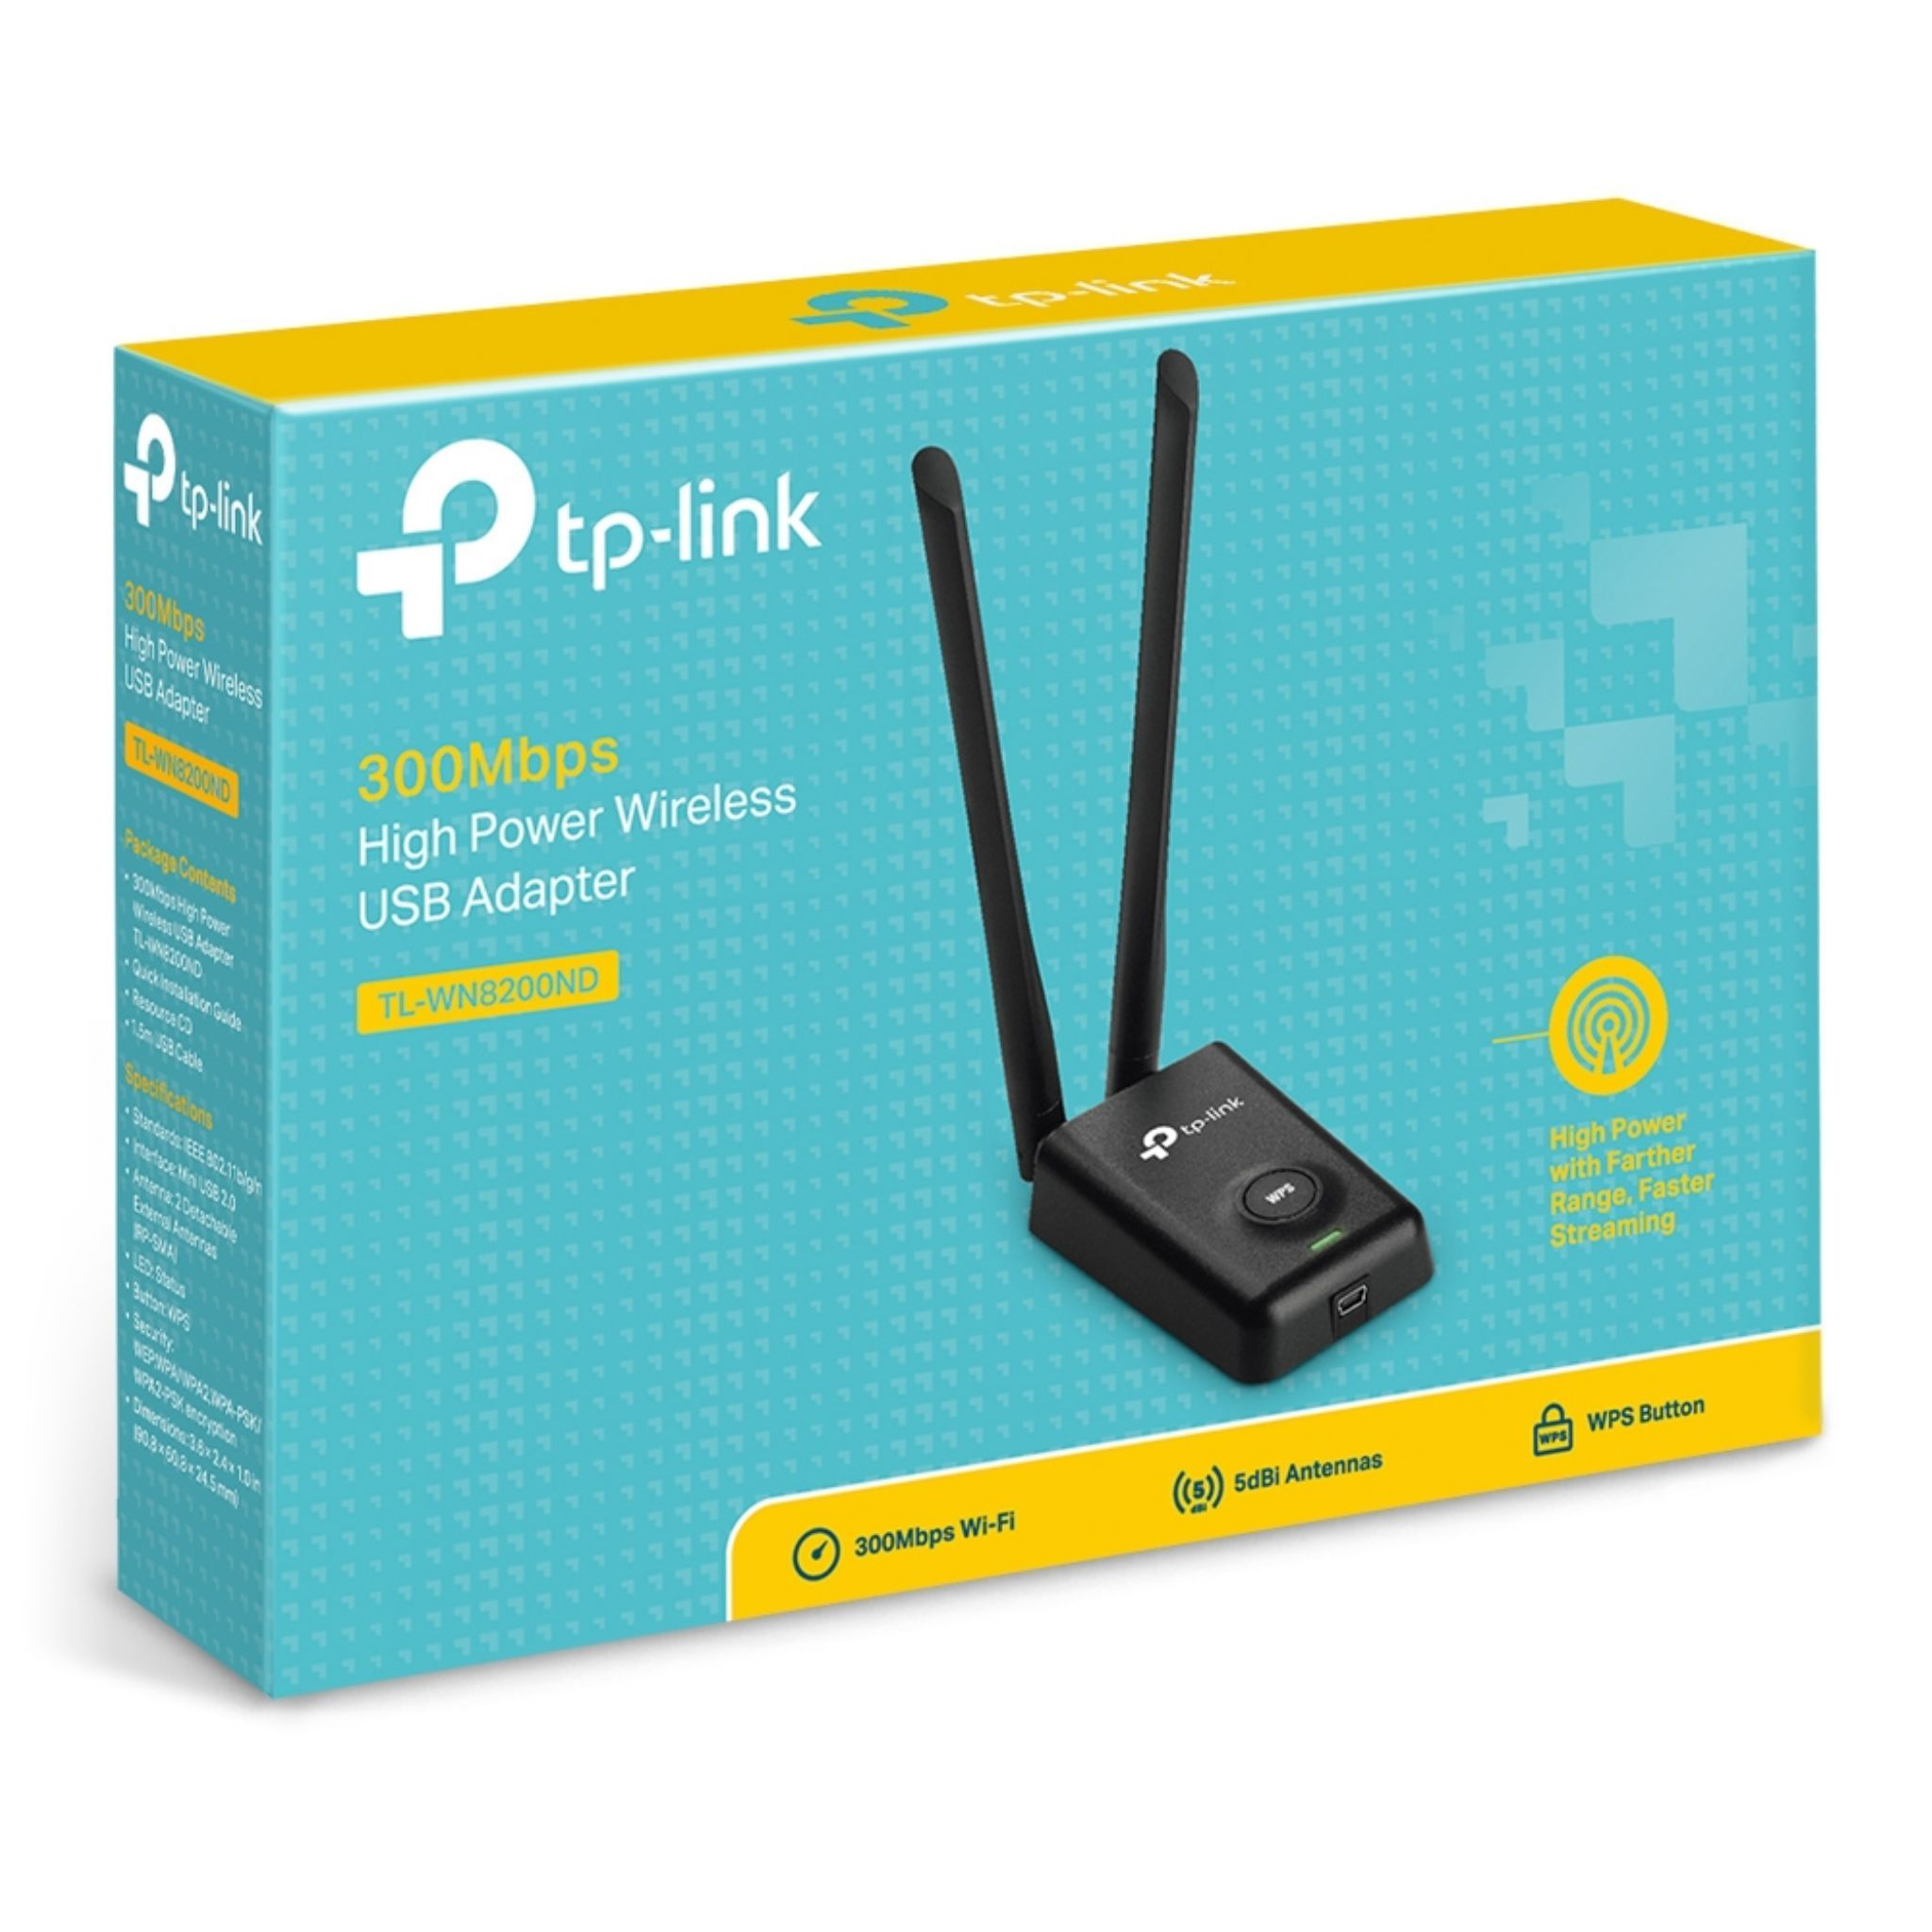 Mbit/s TP-LINK TL-WN8200ND Netzadapter 300